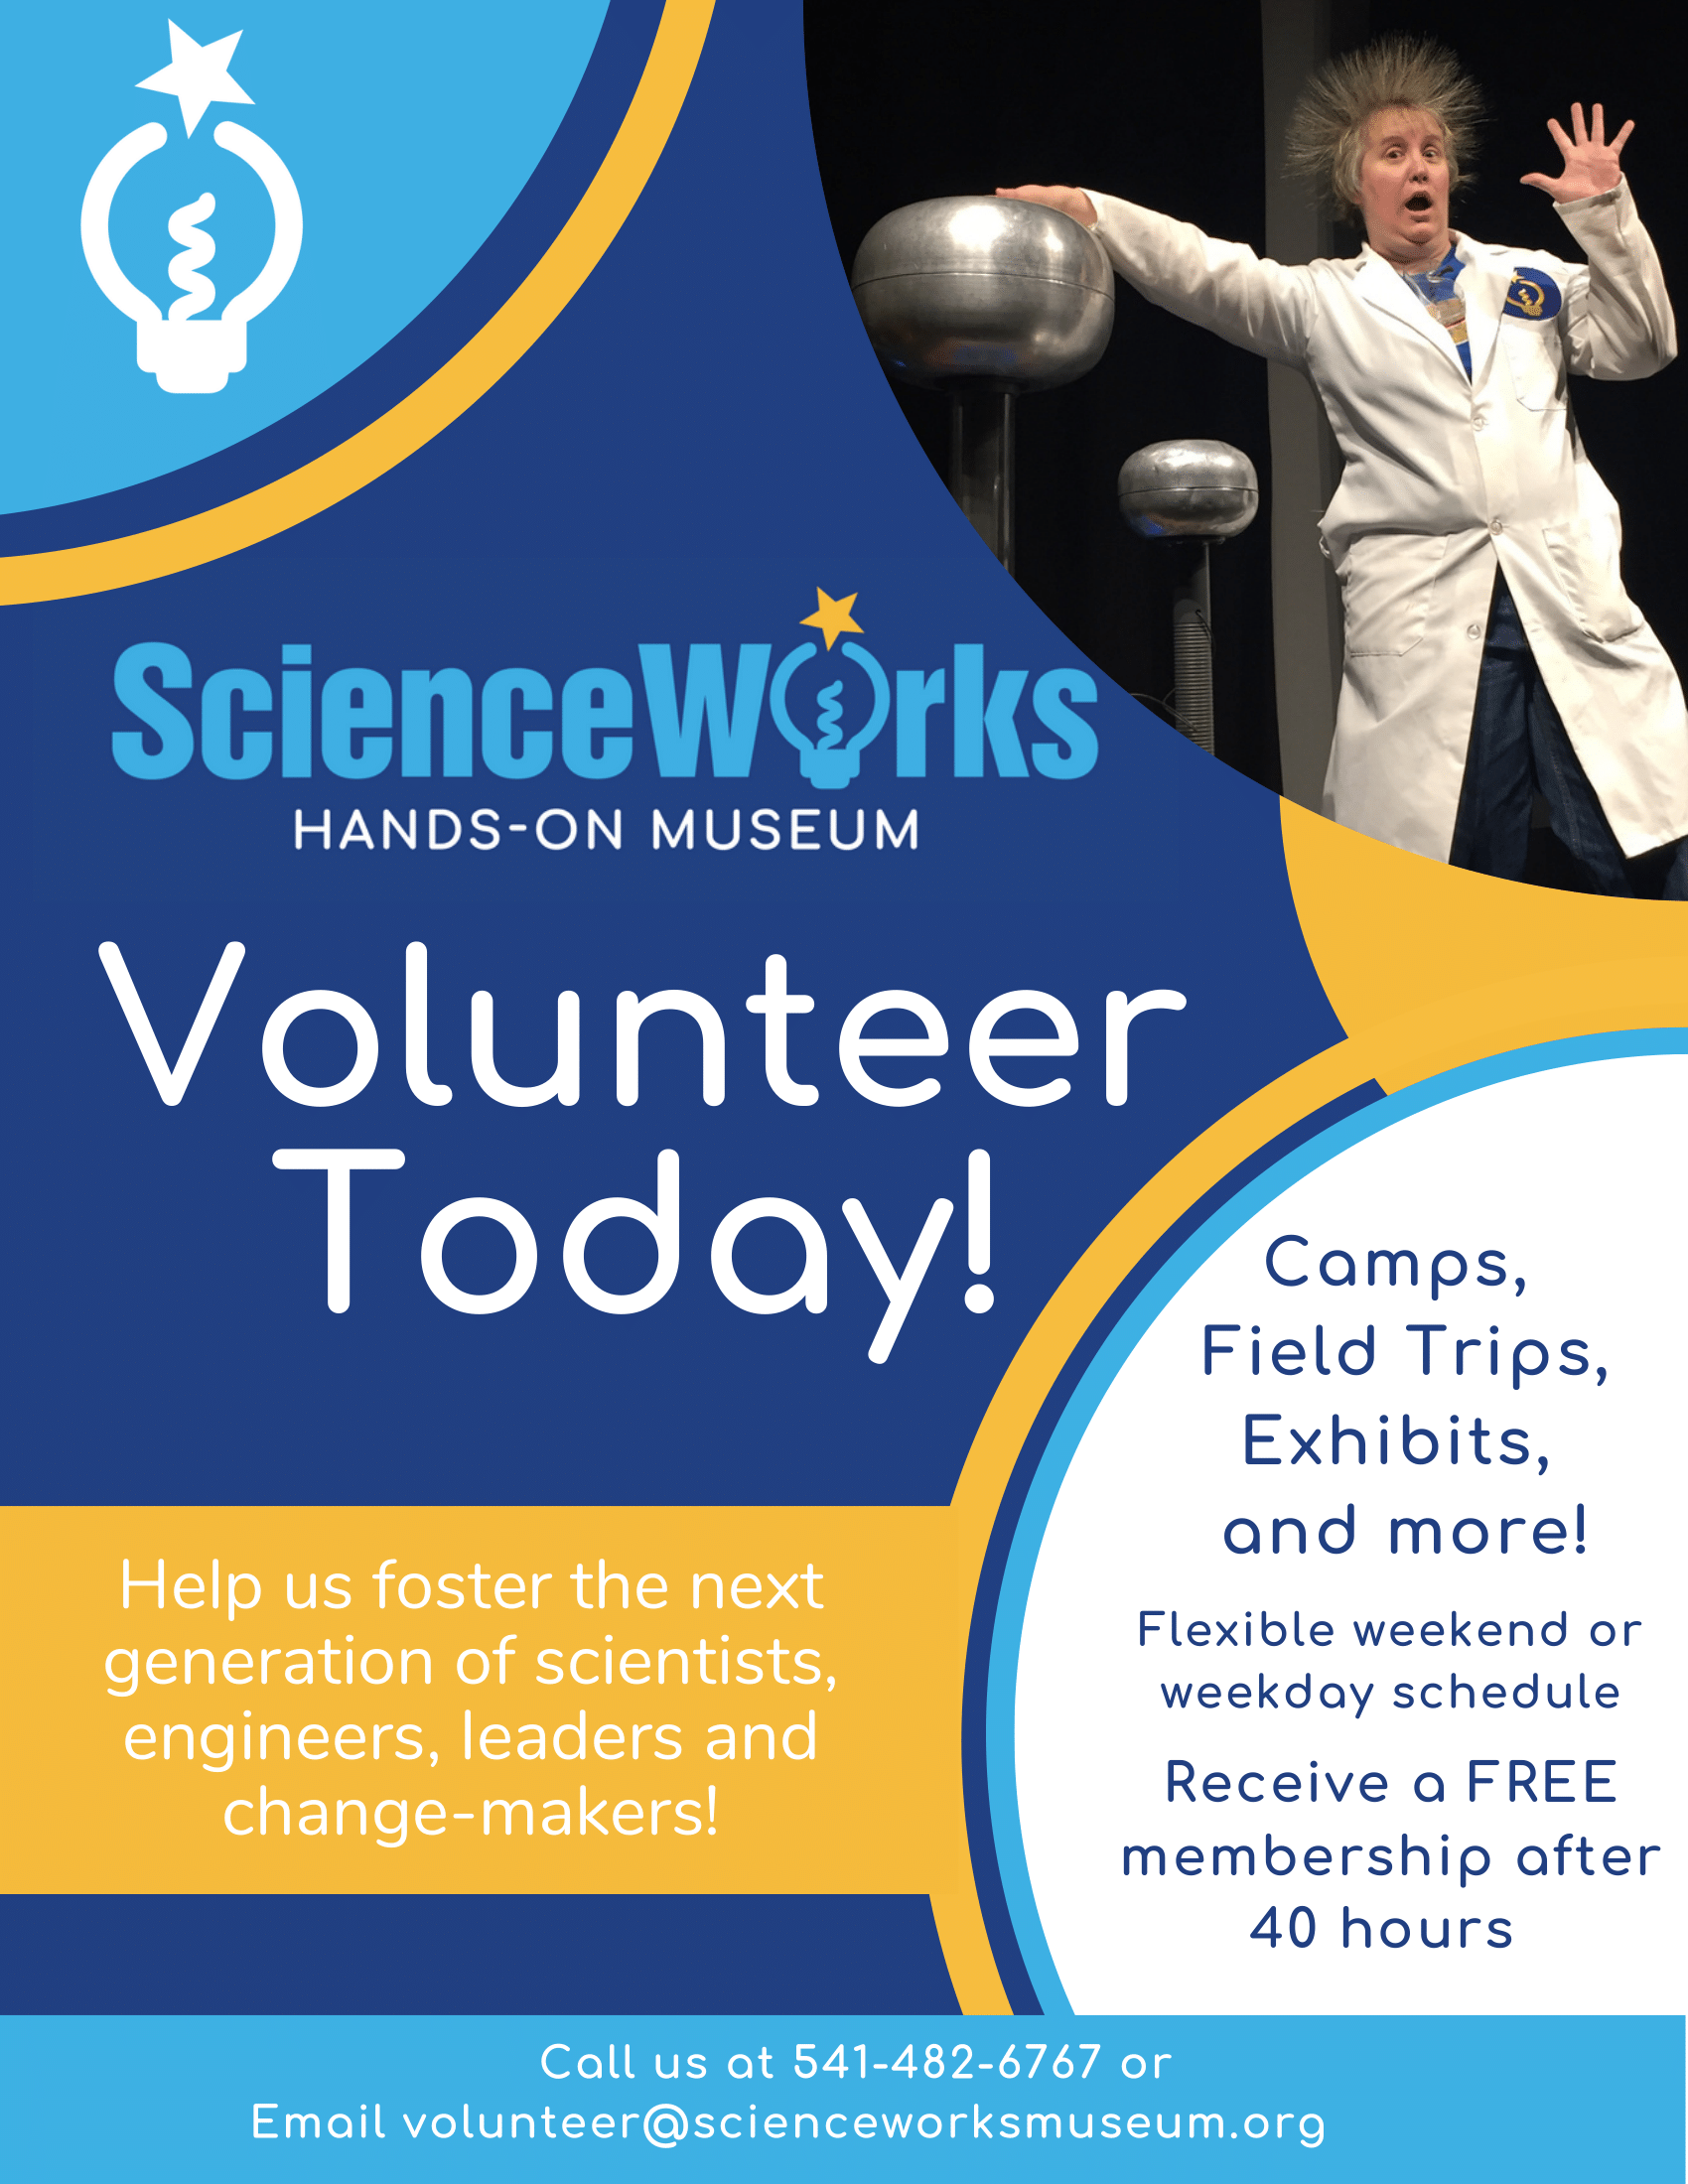 ScienceWorks HANDS-ON MUSEUM Volunteer Today! Help us foster the next generation of scientists, engineers, leaders and change-makers! Camps, Field Trips, Exhibits, and more! Flexible weekend or weekday schedule Receive a FREE membership after 40 hours Call us at 541-482-6767 or Email volunteer@scienceworksmuseum.org